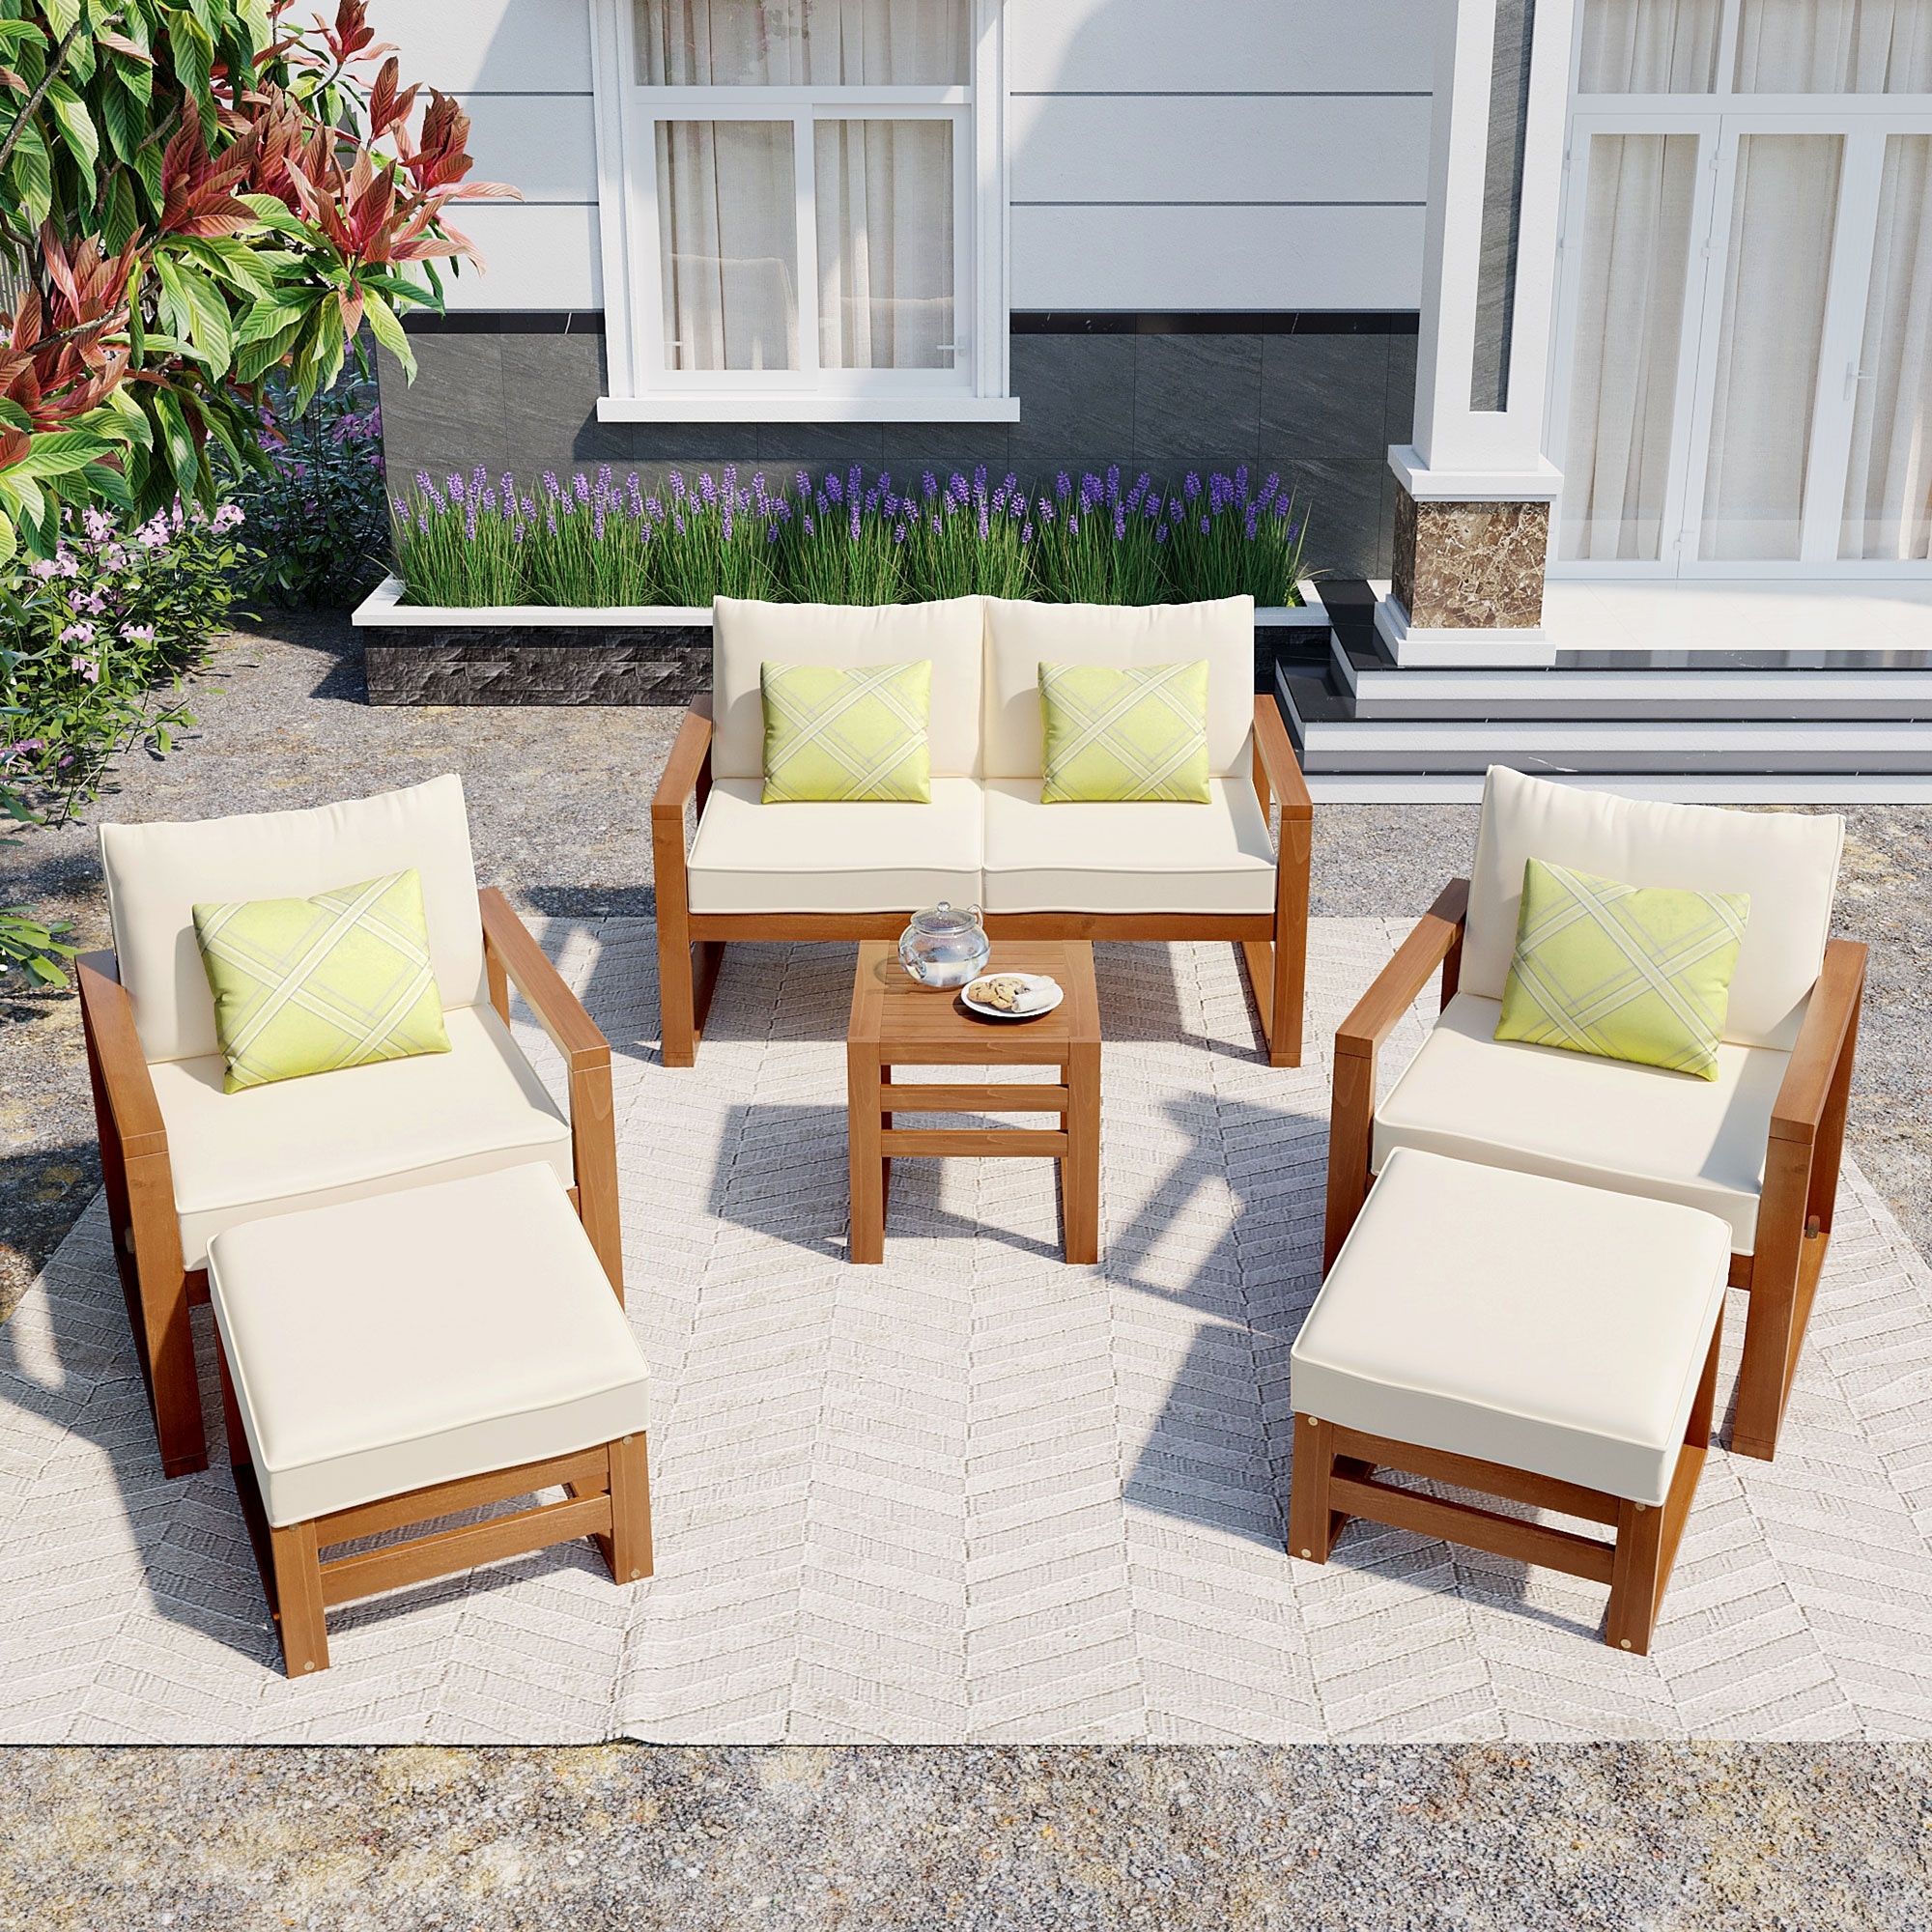 6-piece Outdoor Patio Acacia Wood Conversation Set  Sectional Garden Seating Groups Chat Set With Cushion And 4 Throw Pillows